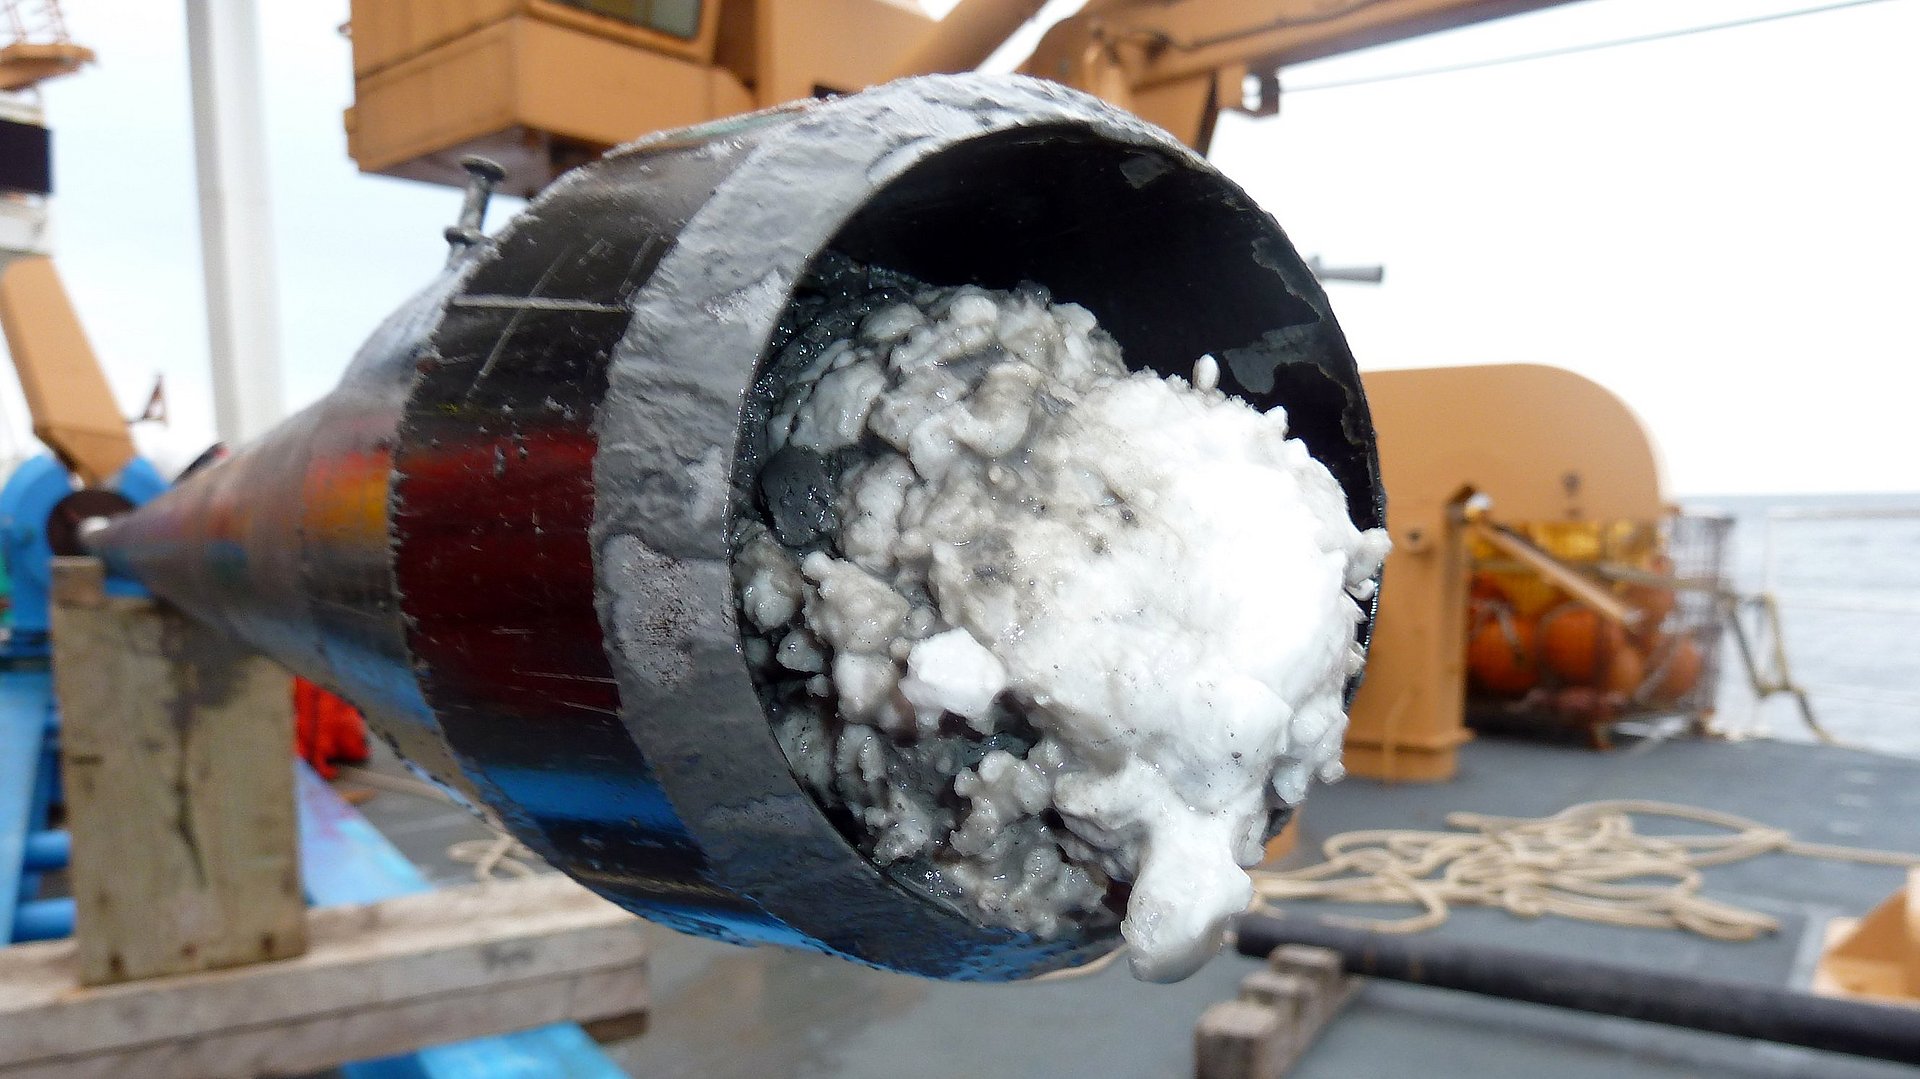 Especially when a pipeline is idle for a longer time at low temperatures, hydrate plugs can form, similar to the methane hydrate core shown in the picture.